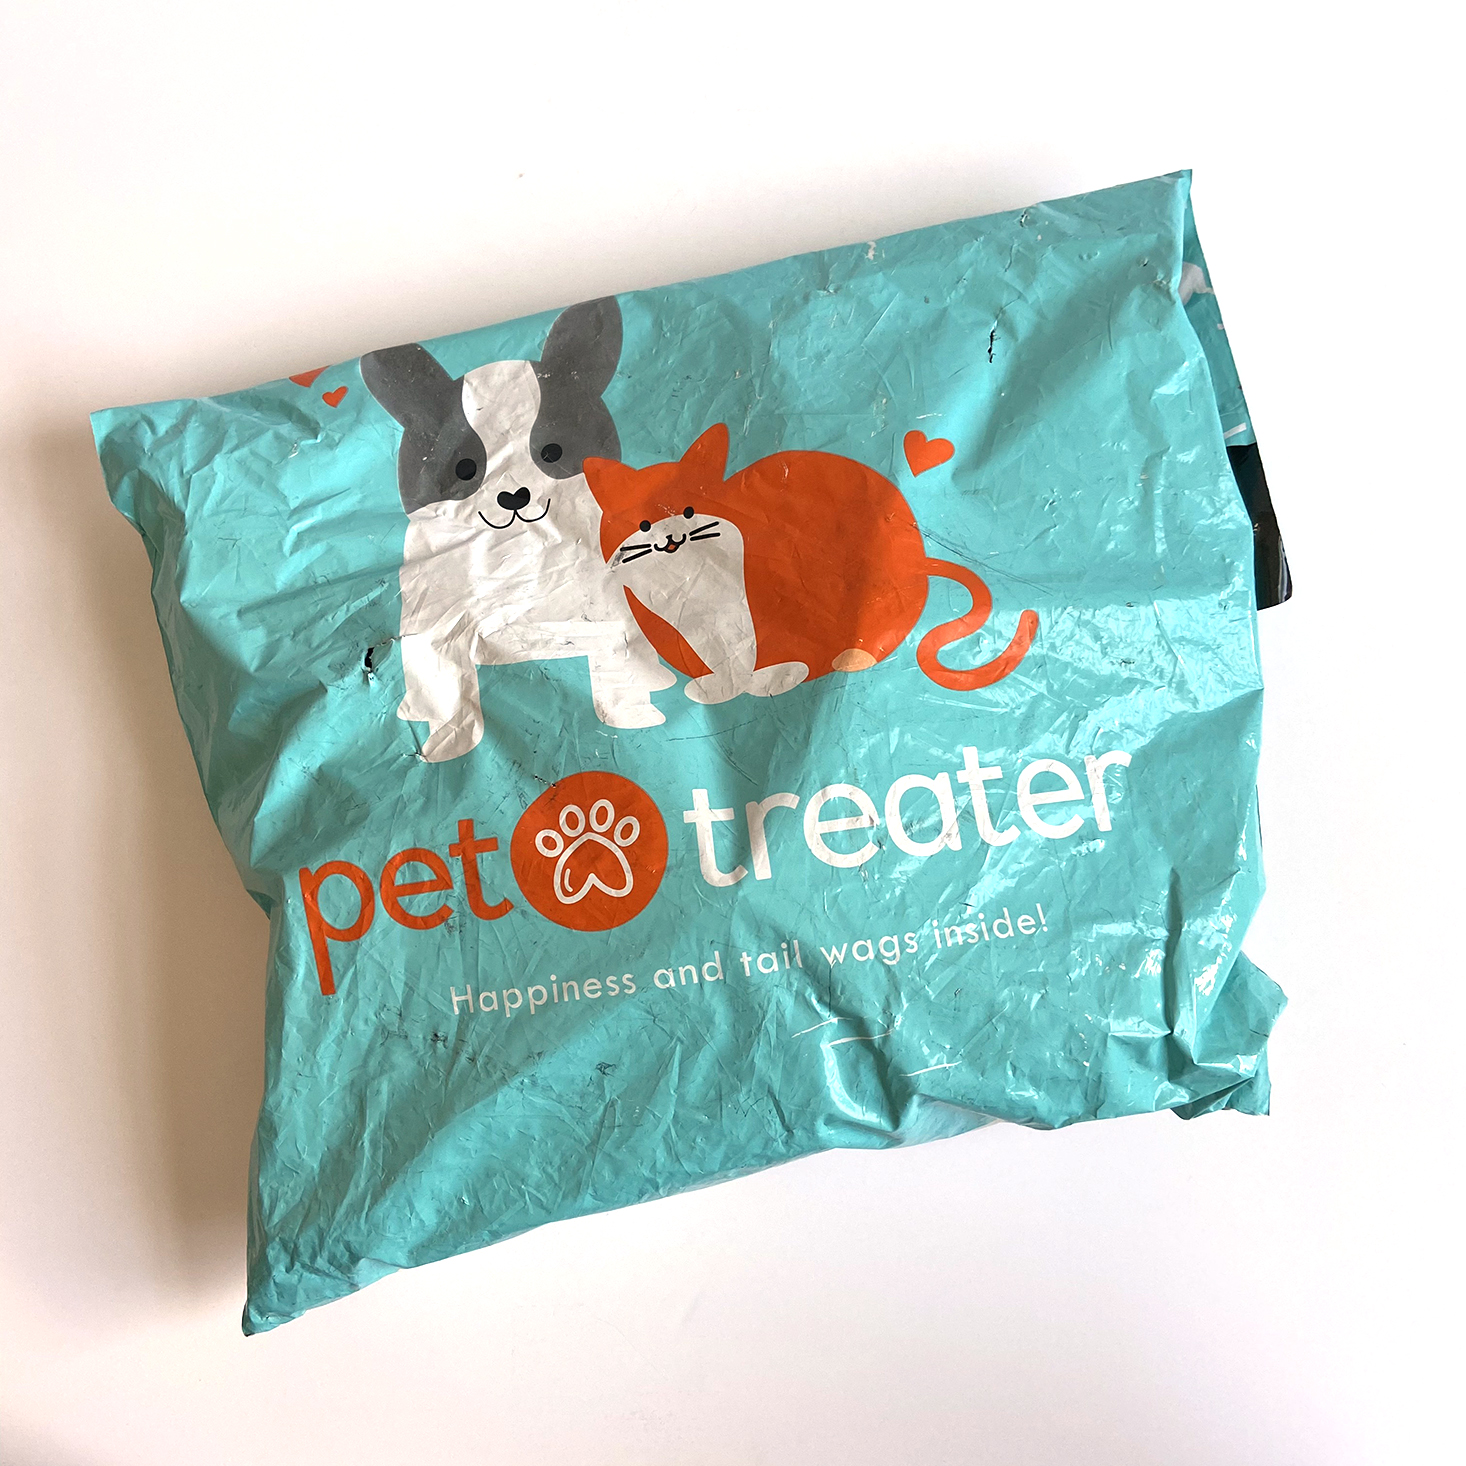 Pet Treater Dog Pack Subscription Review – January 2021